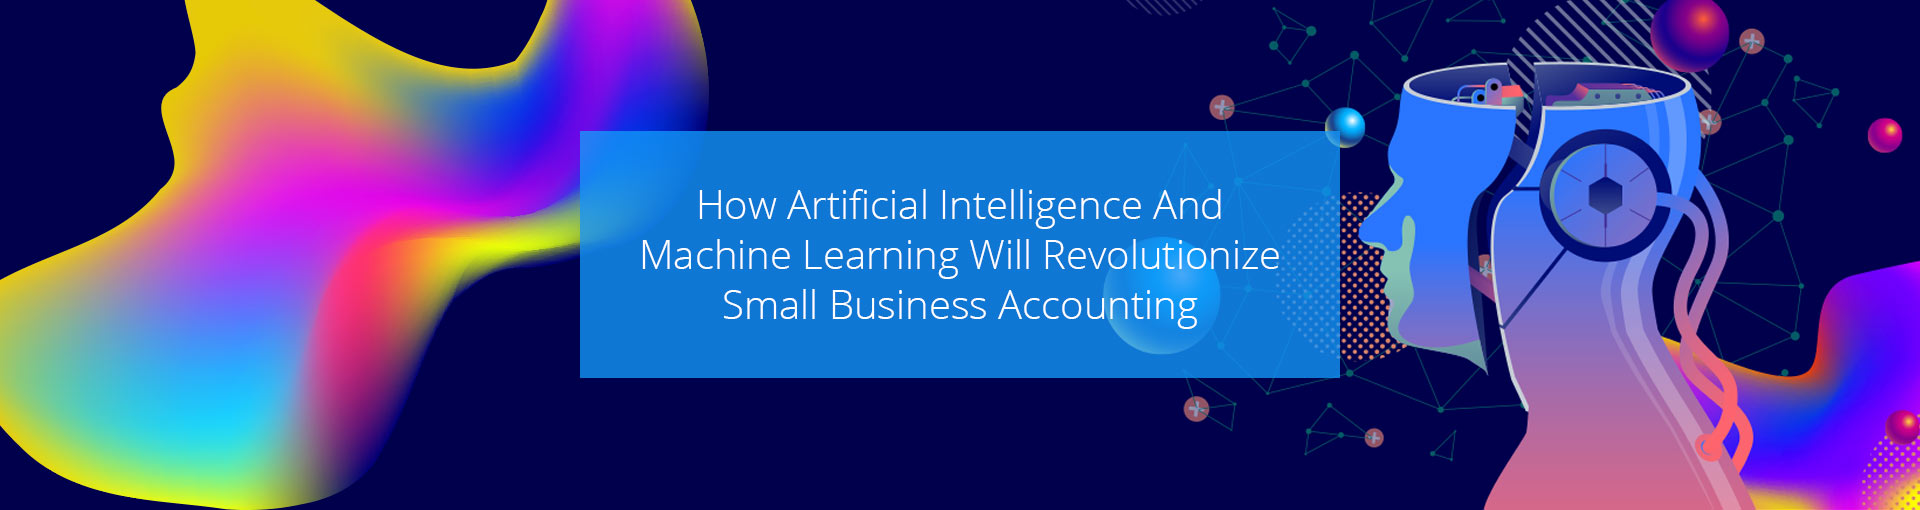 How Artificial Intelligence And Machine Learning Will Revolutionize Small Business Accounting Featured Image